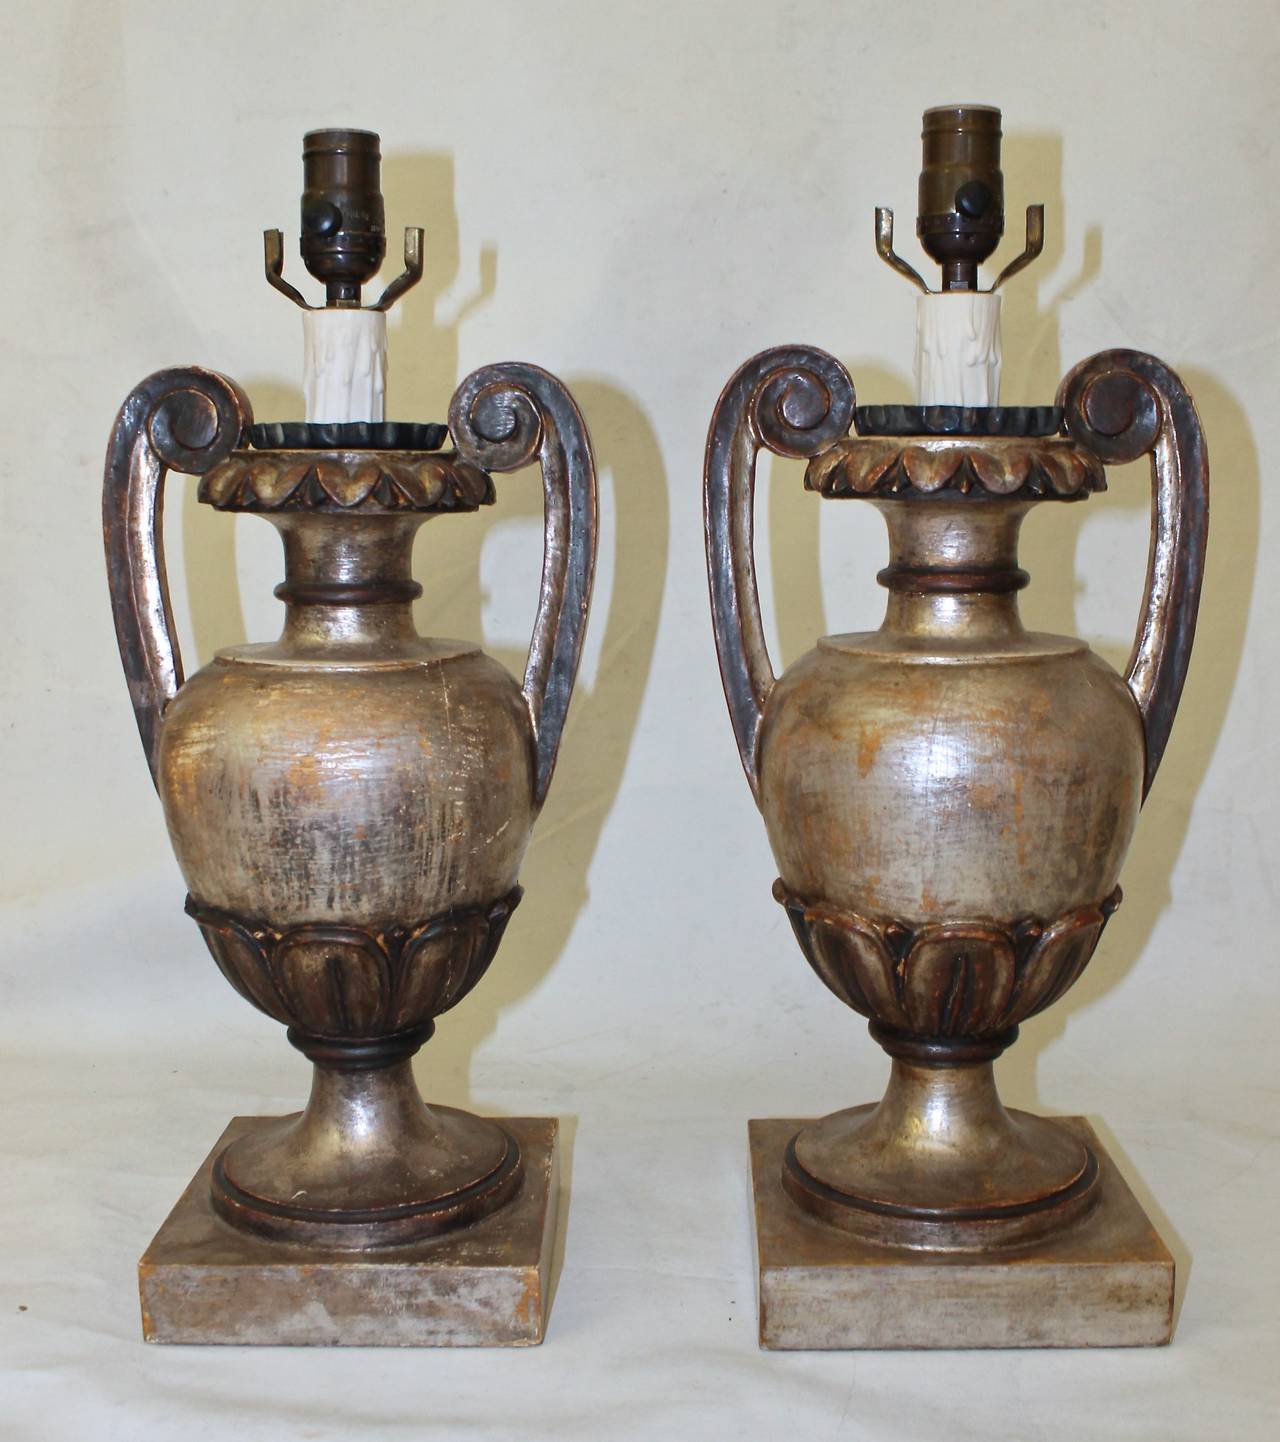 Pair of French nicely carved wood candle pricket lamps in silver water gilt finish.